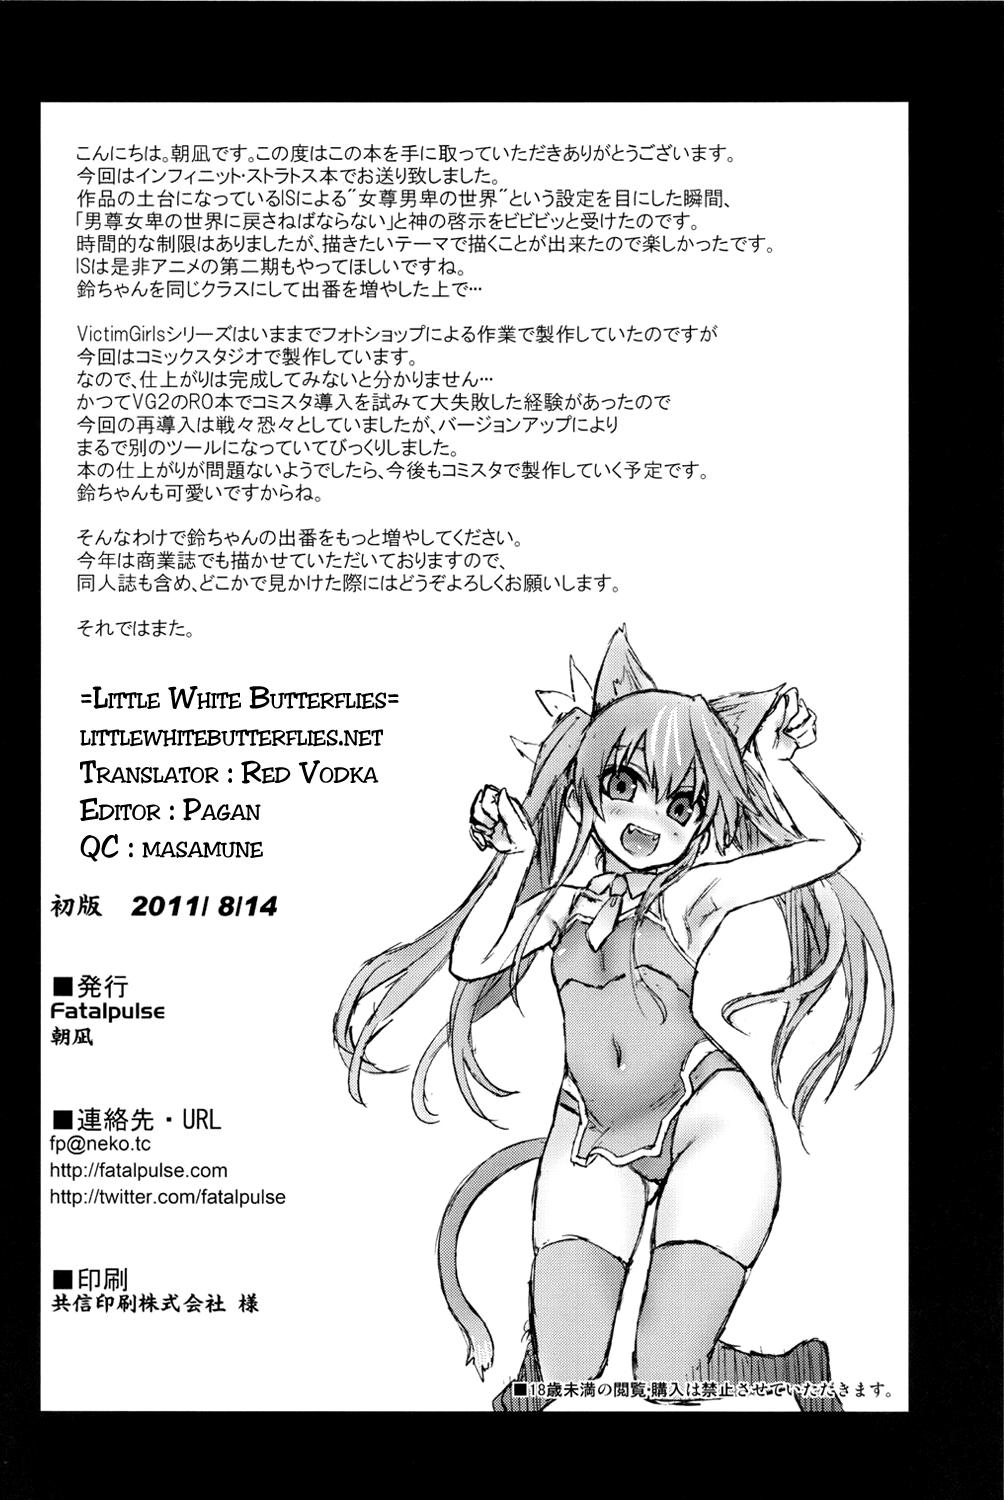 Teens Victim Girls 11 TEARY RED EYES - Infinite stratos Butts - Page 29